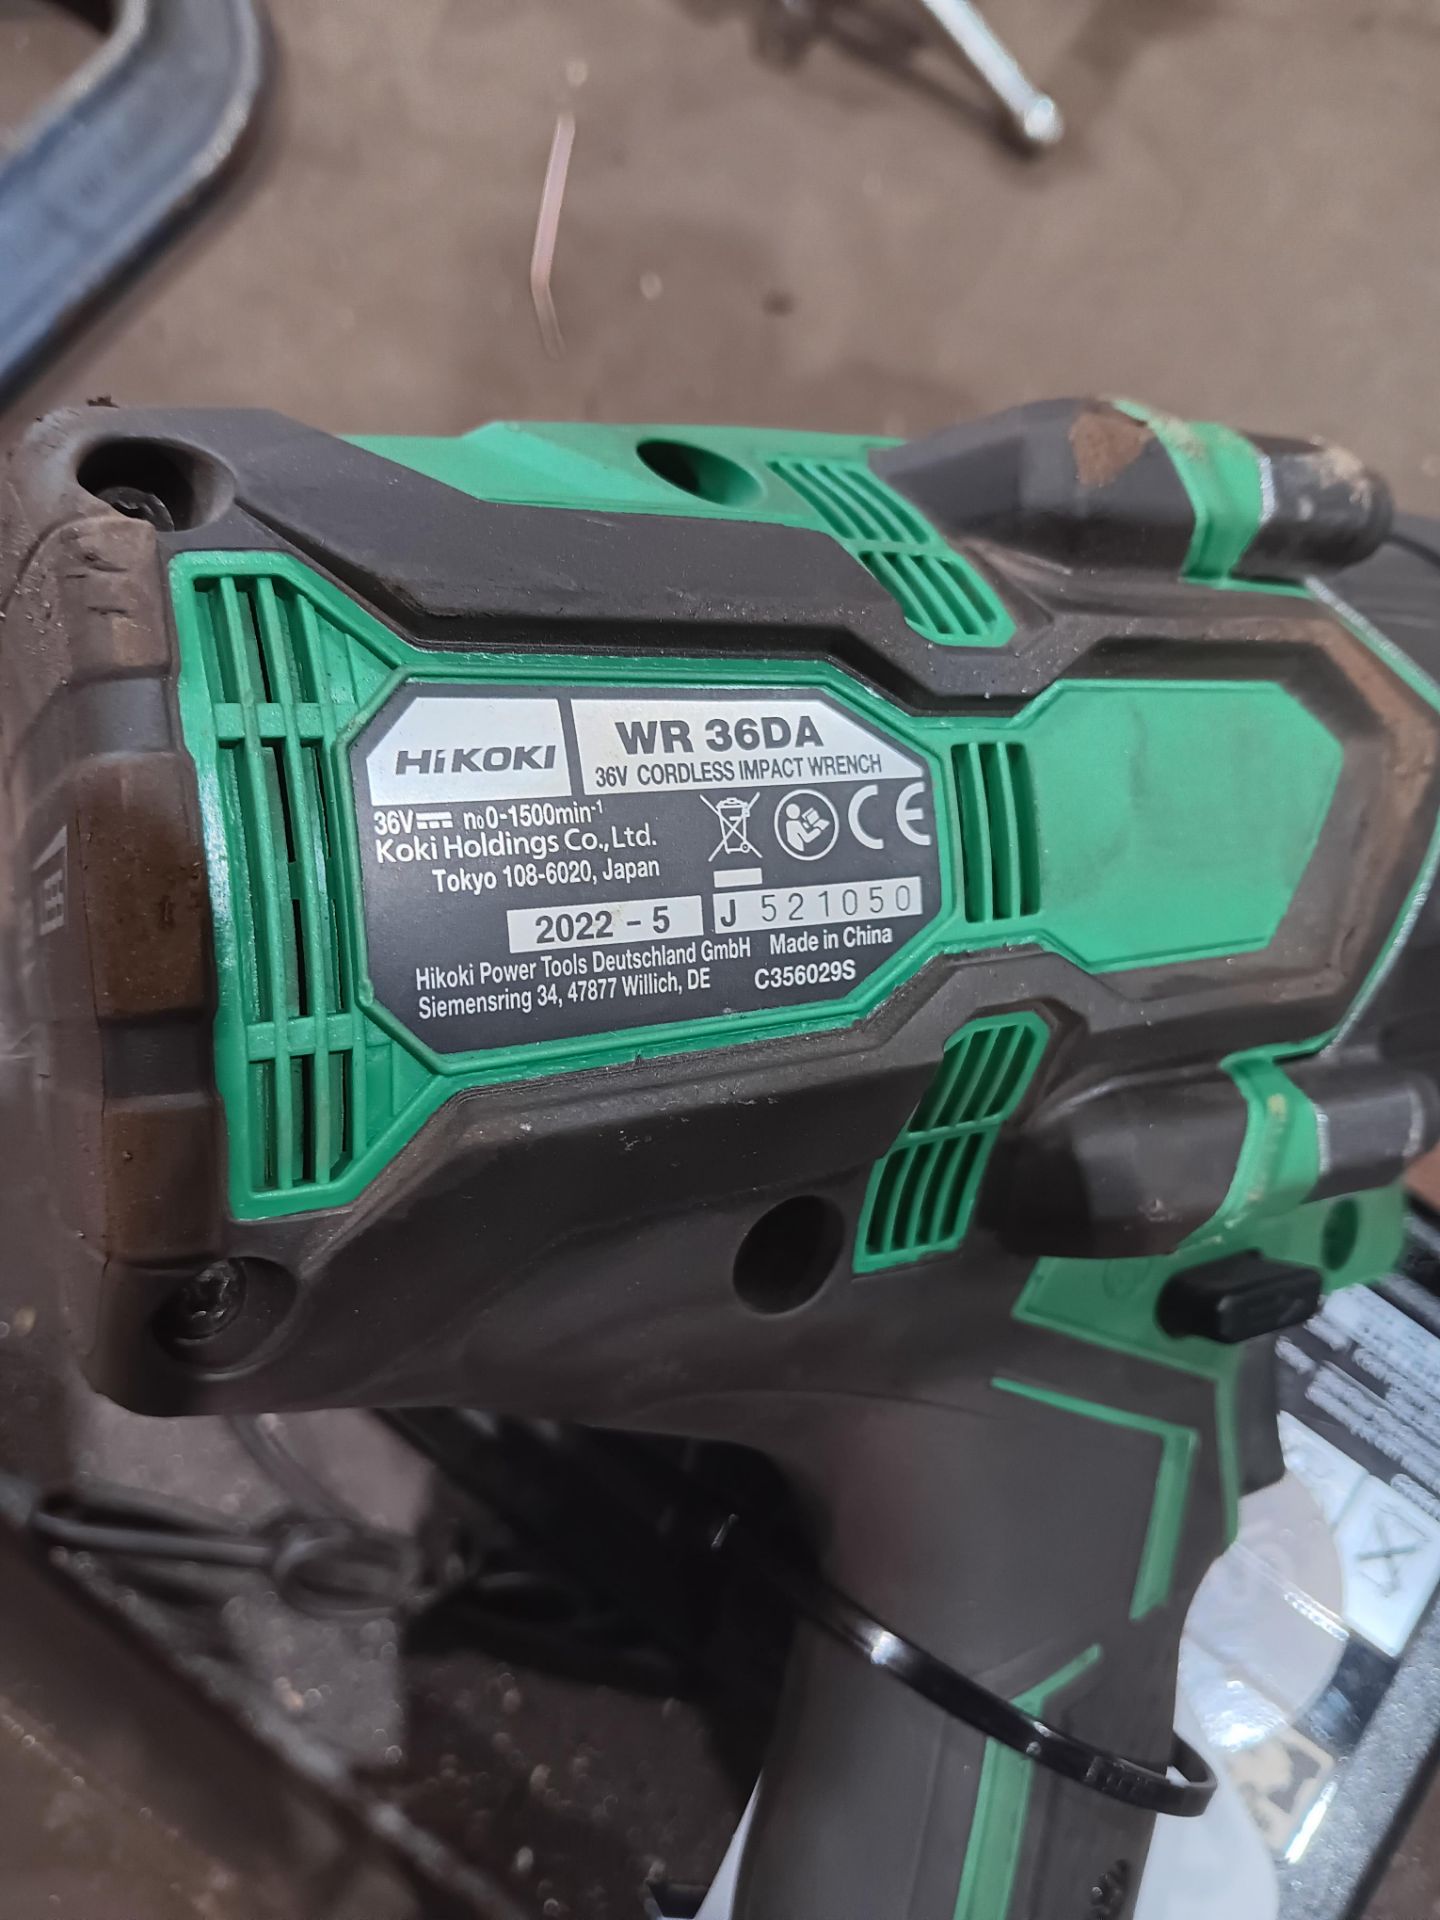 2 x Hikoki WR36DA 36v cordless impact wrench with 2 batteries and 1 x charger - Image 2 of 3